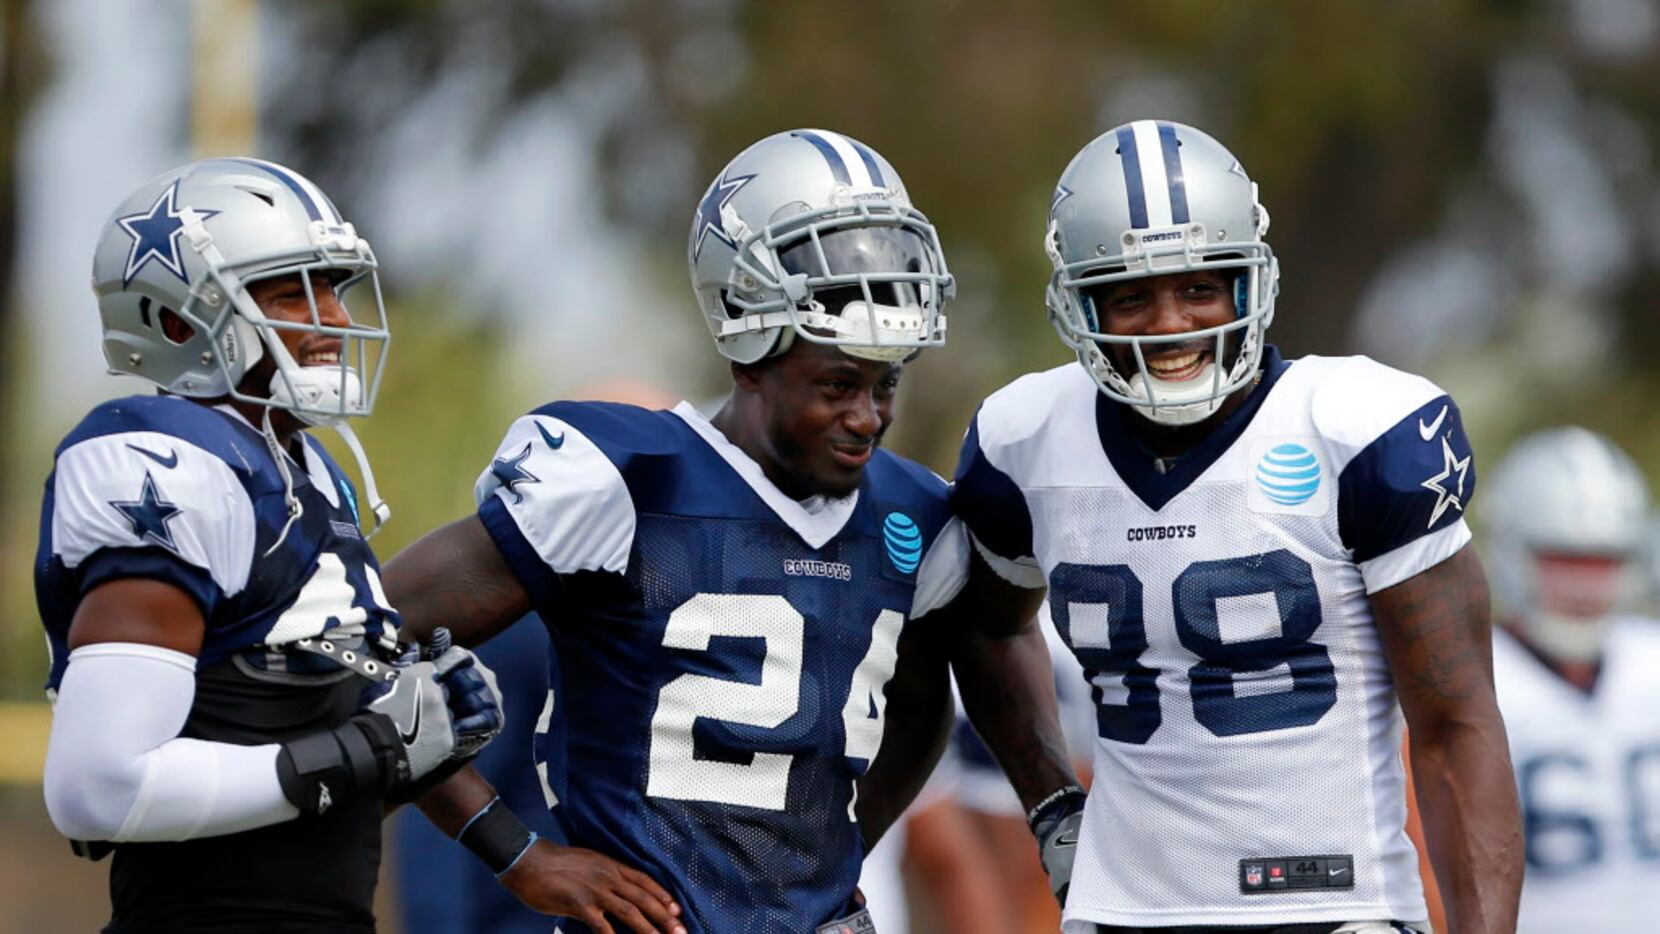 Claiborne concludes one of best camps of career wearing Bryant's